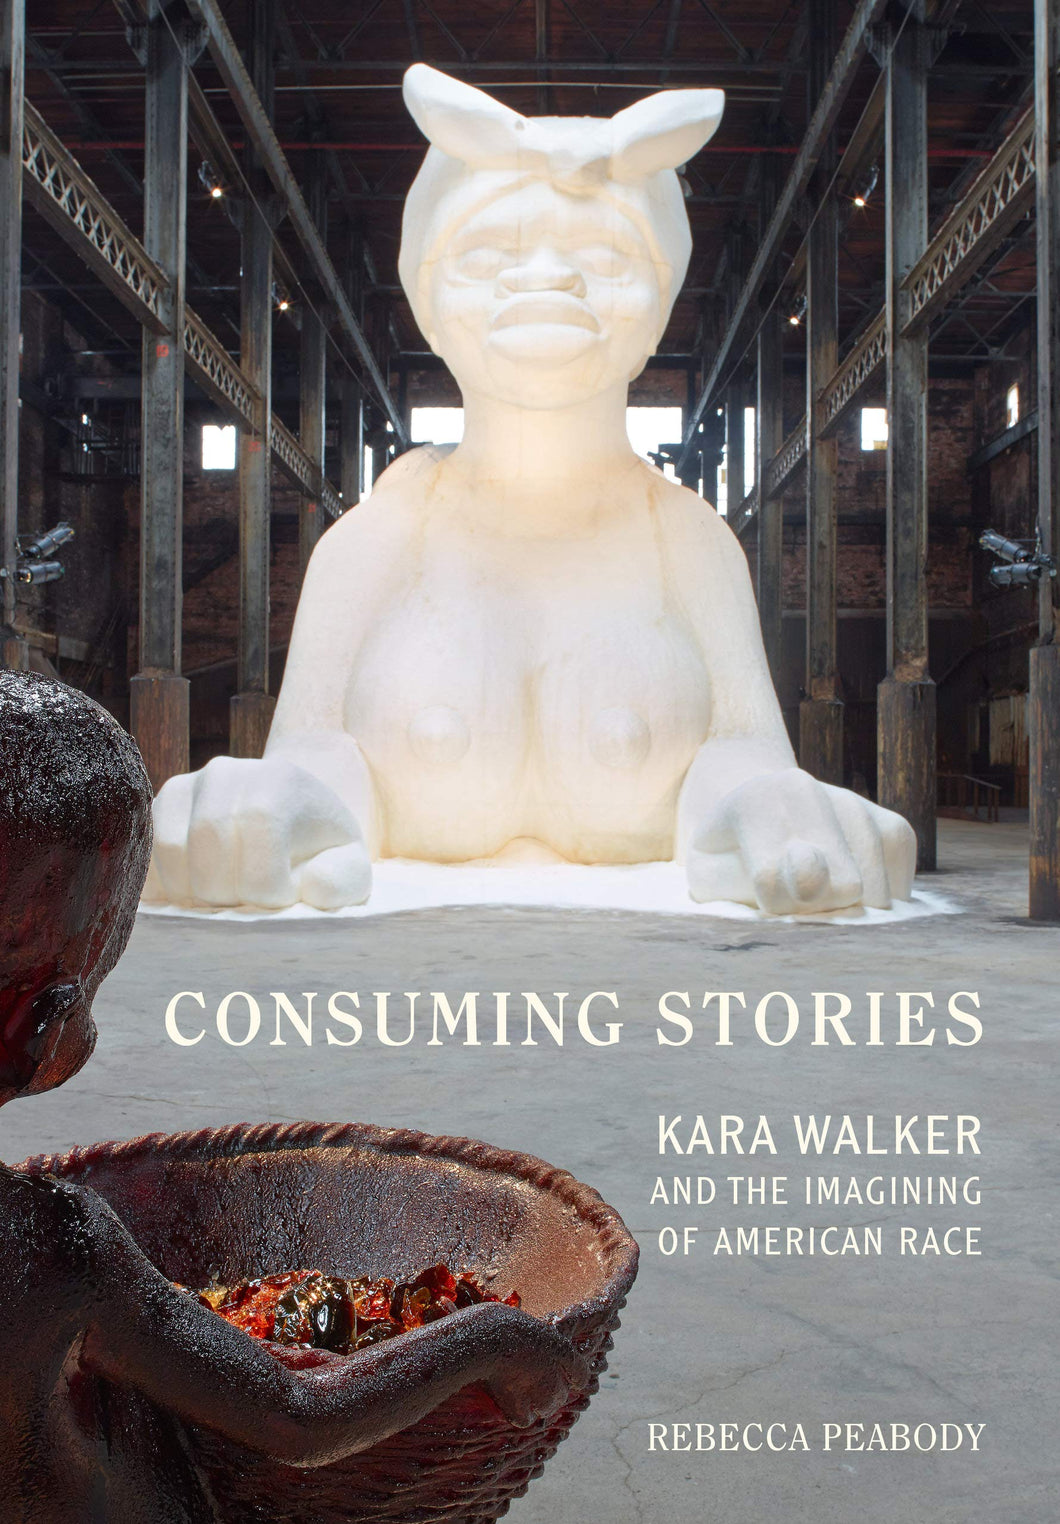 Consuming Stories: Kara Walker and the Imagining of American Race by Rebecca Peabody